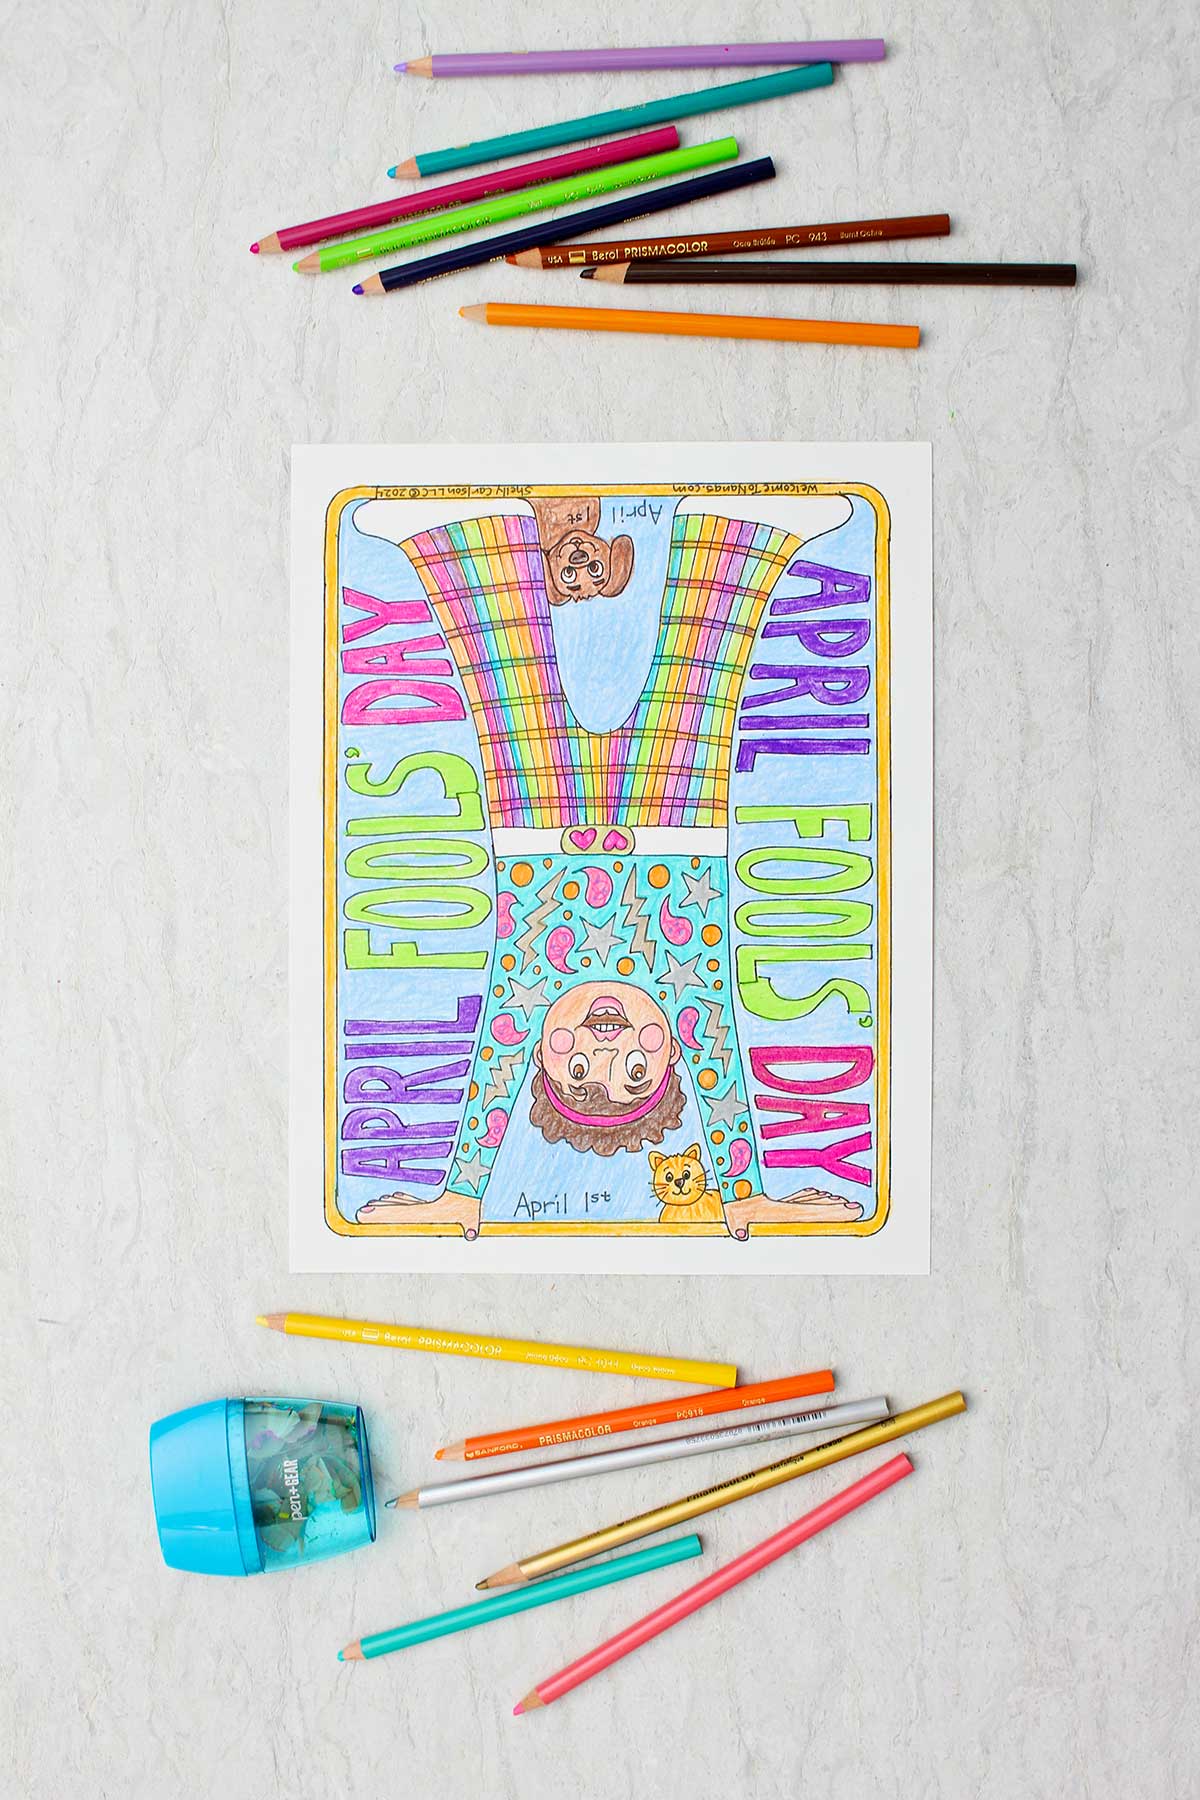 Fully colored April Fools Day Coloring Page of a person doing a handstand in a colorful outfit with colored pencils and a sharpener near by.